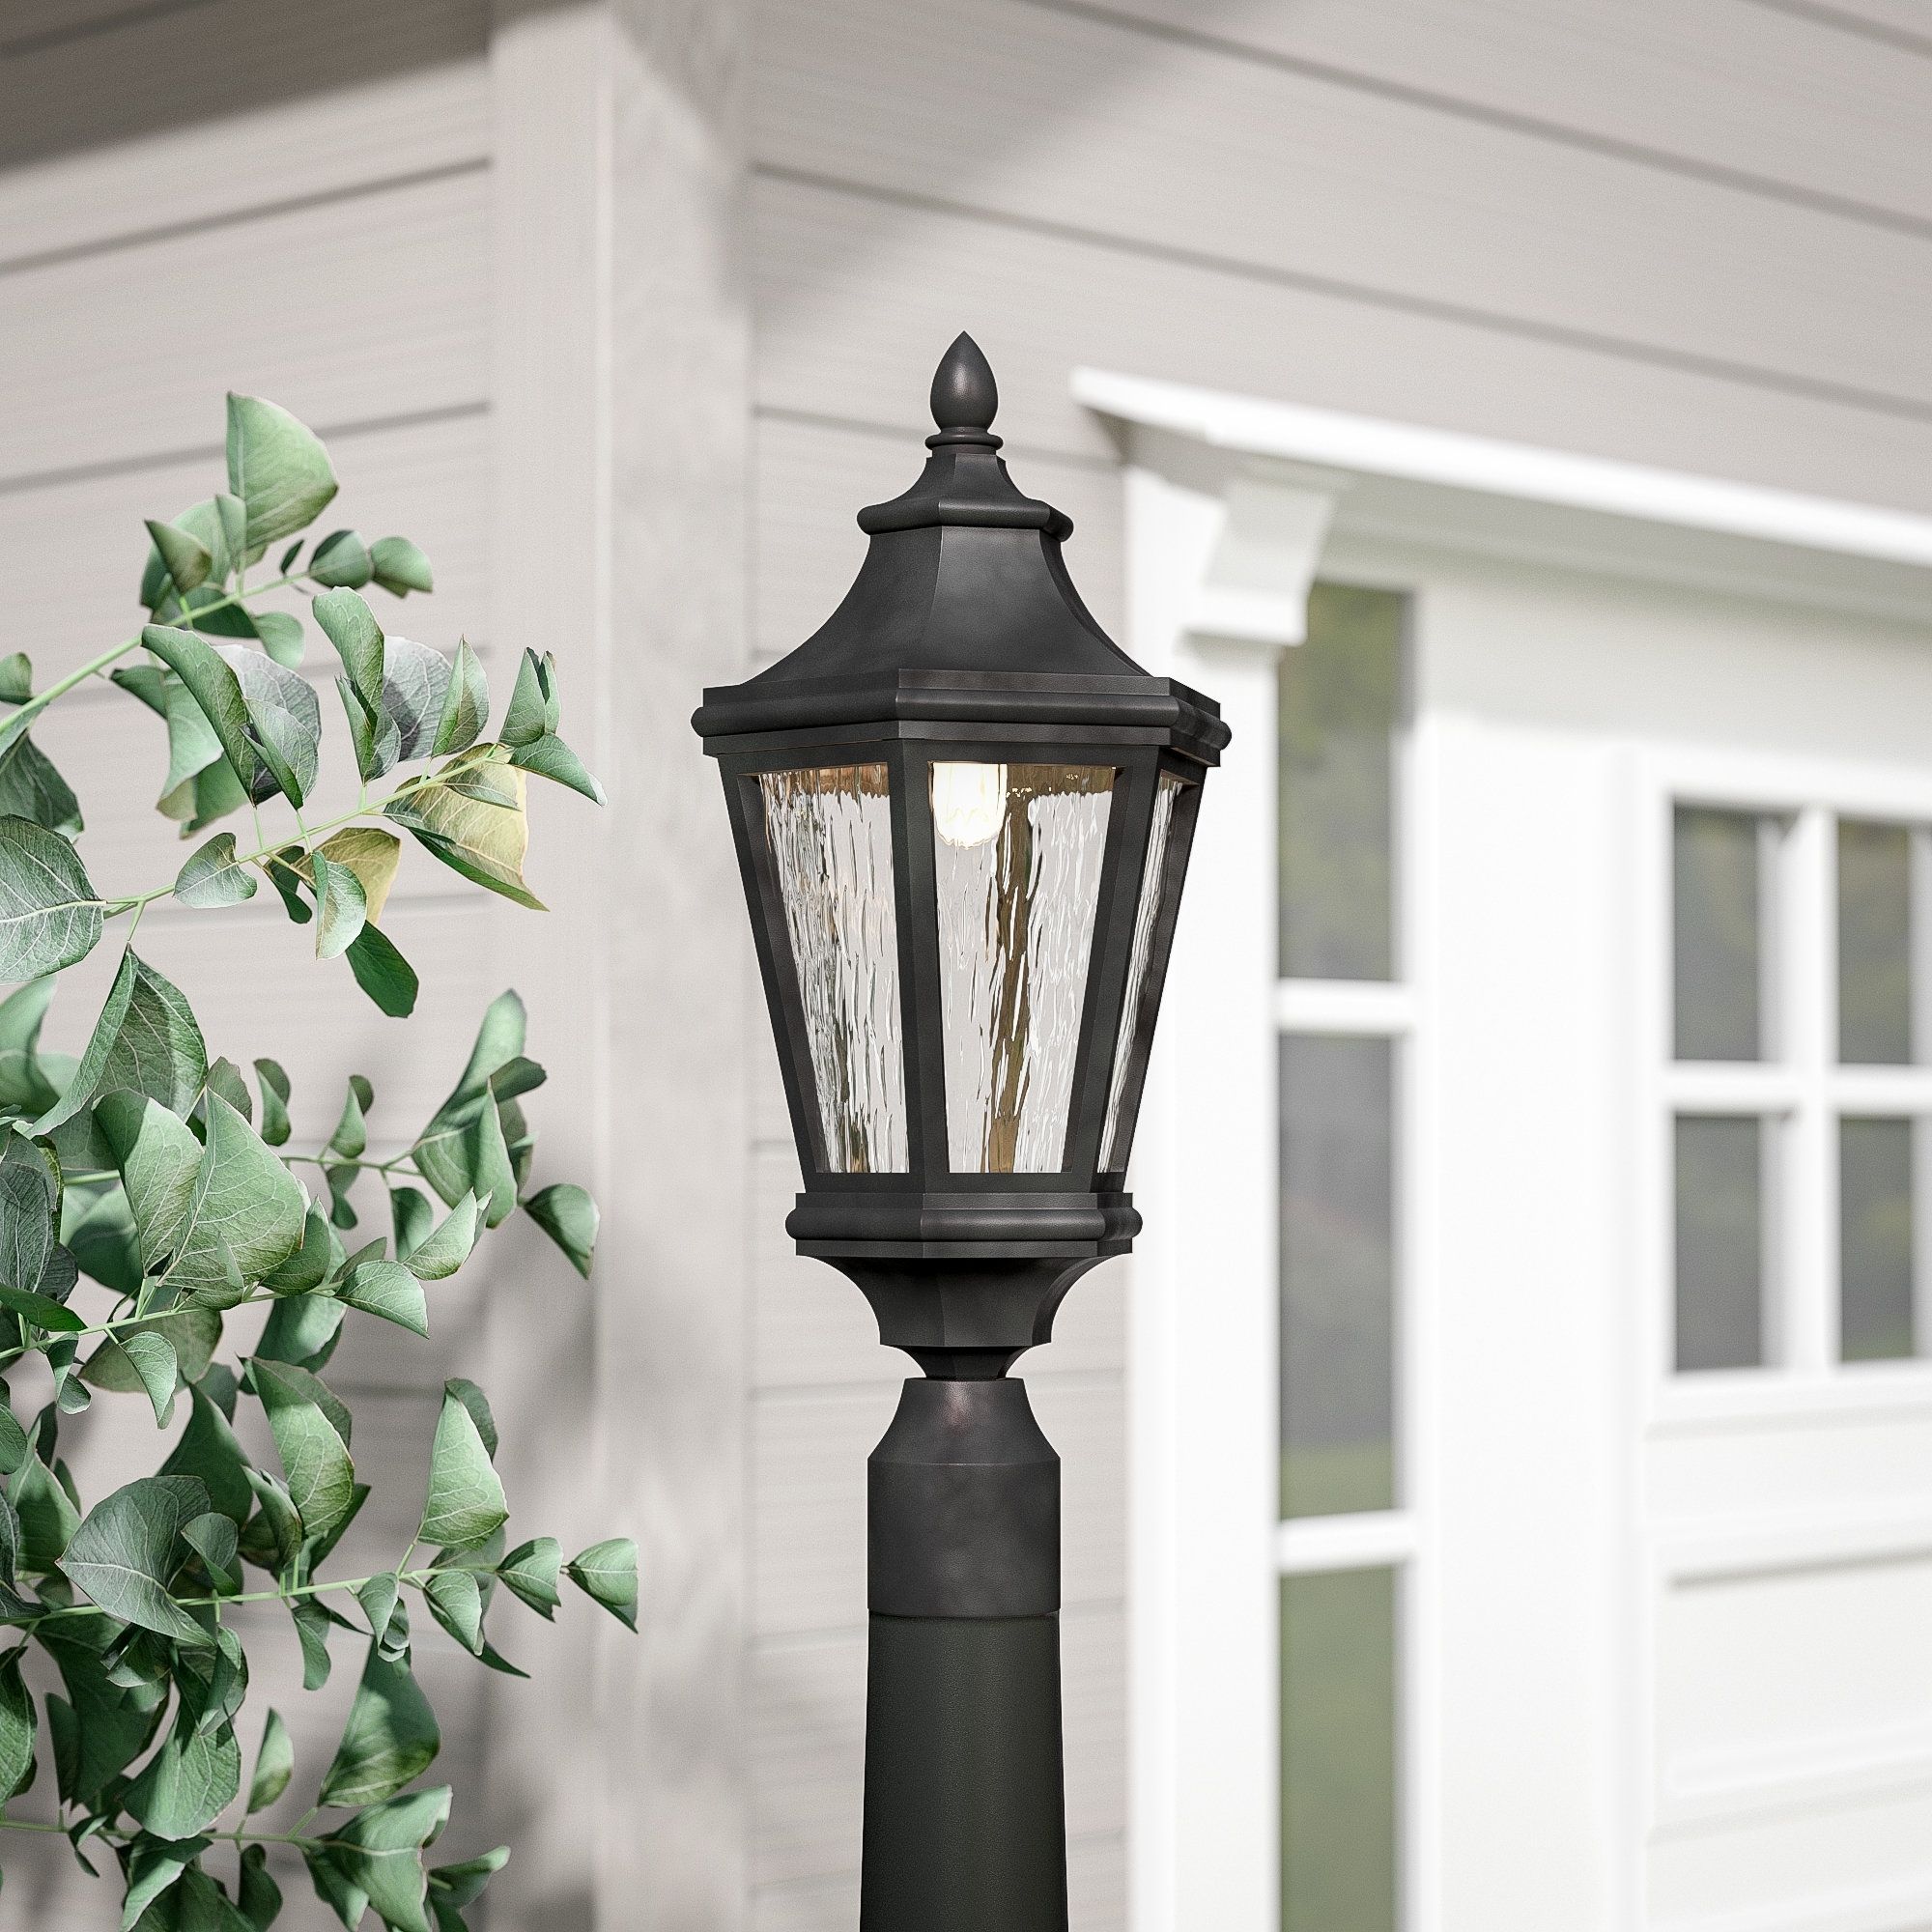 Darby Home Co Messer Outdoor 1 Light Led Lantern Head | Wayfair For Joanns Outdoor Lanterns (View 19 of 20)